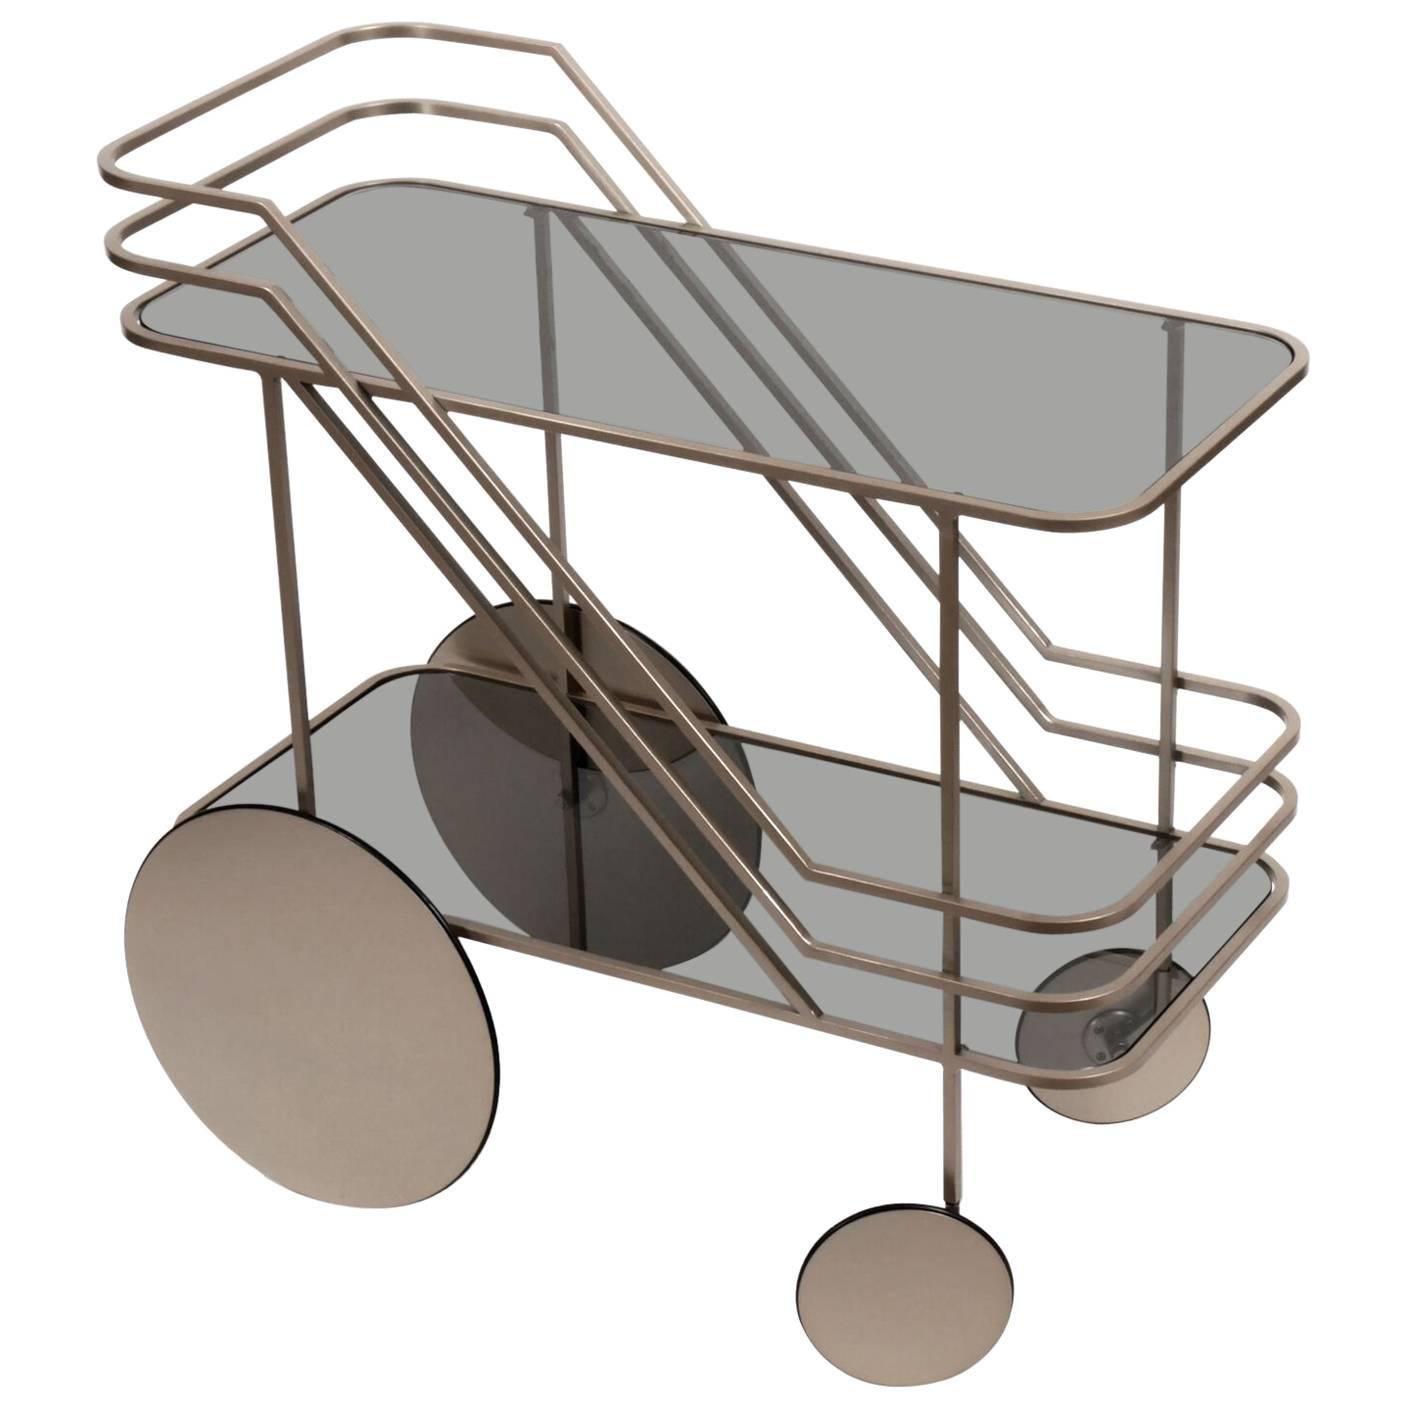 Champagne European Powder Coated Metal Drinks Cart with Smoke Glass Shelves